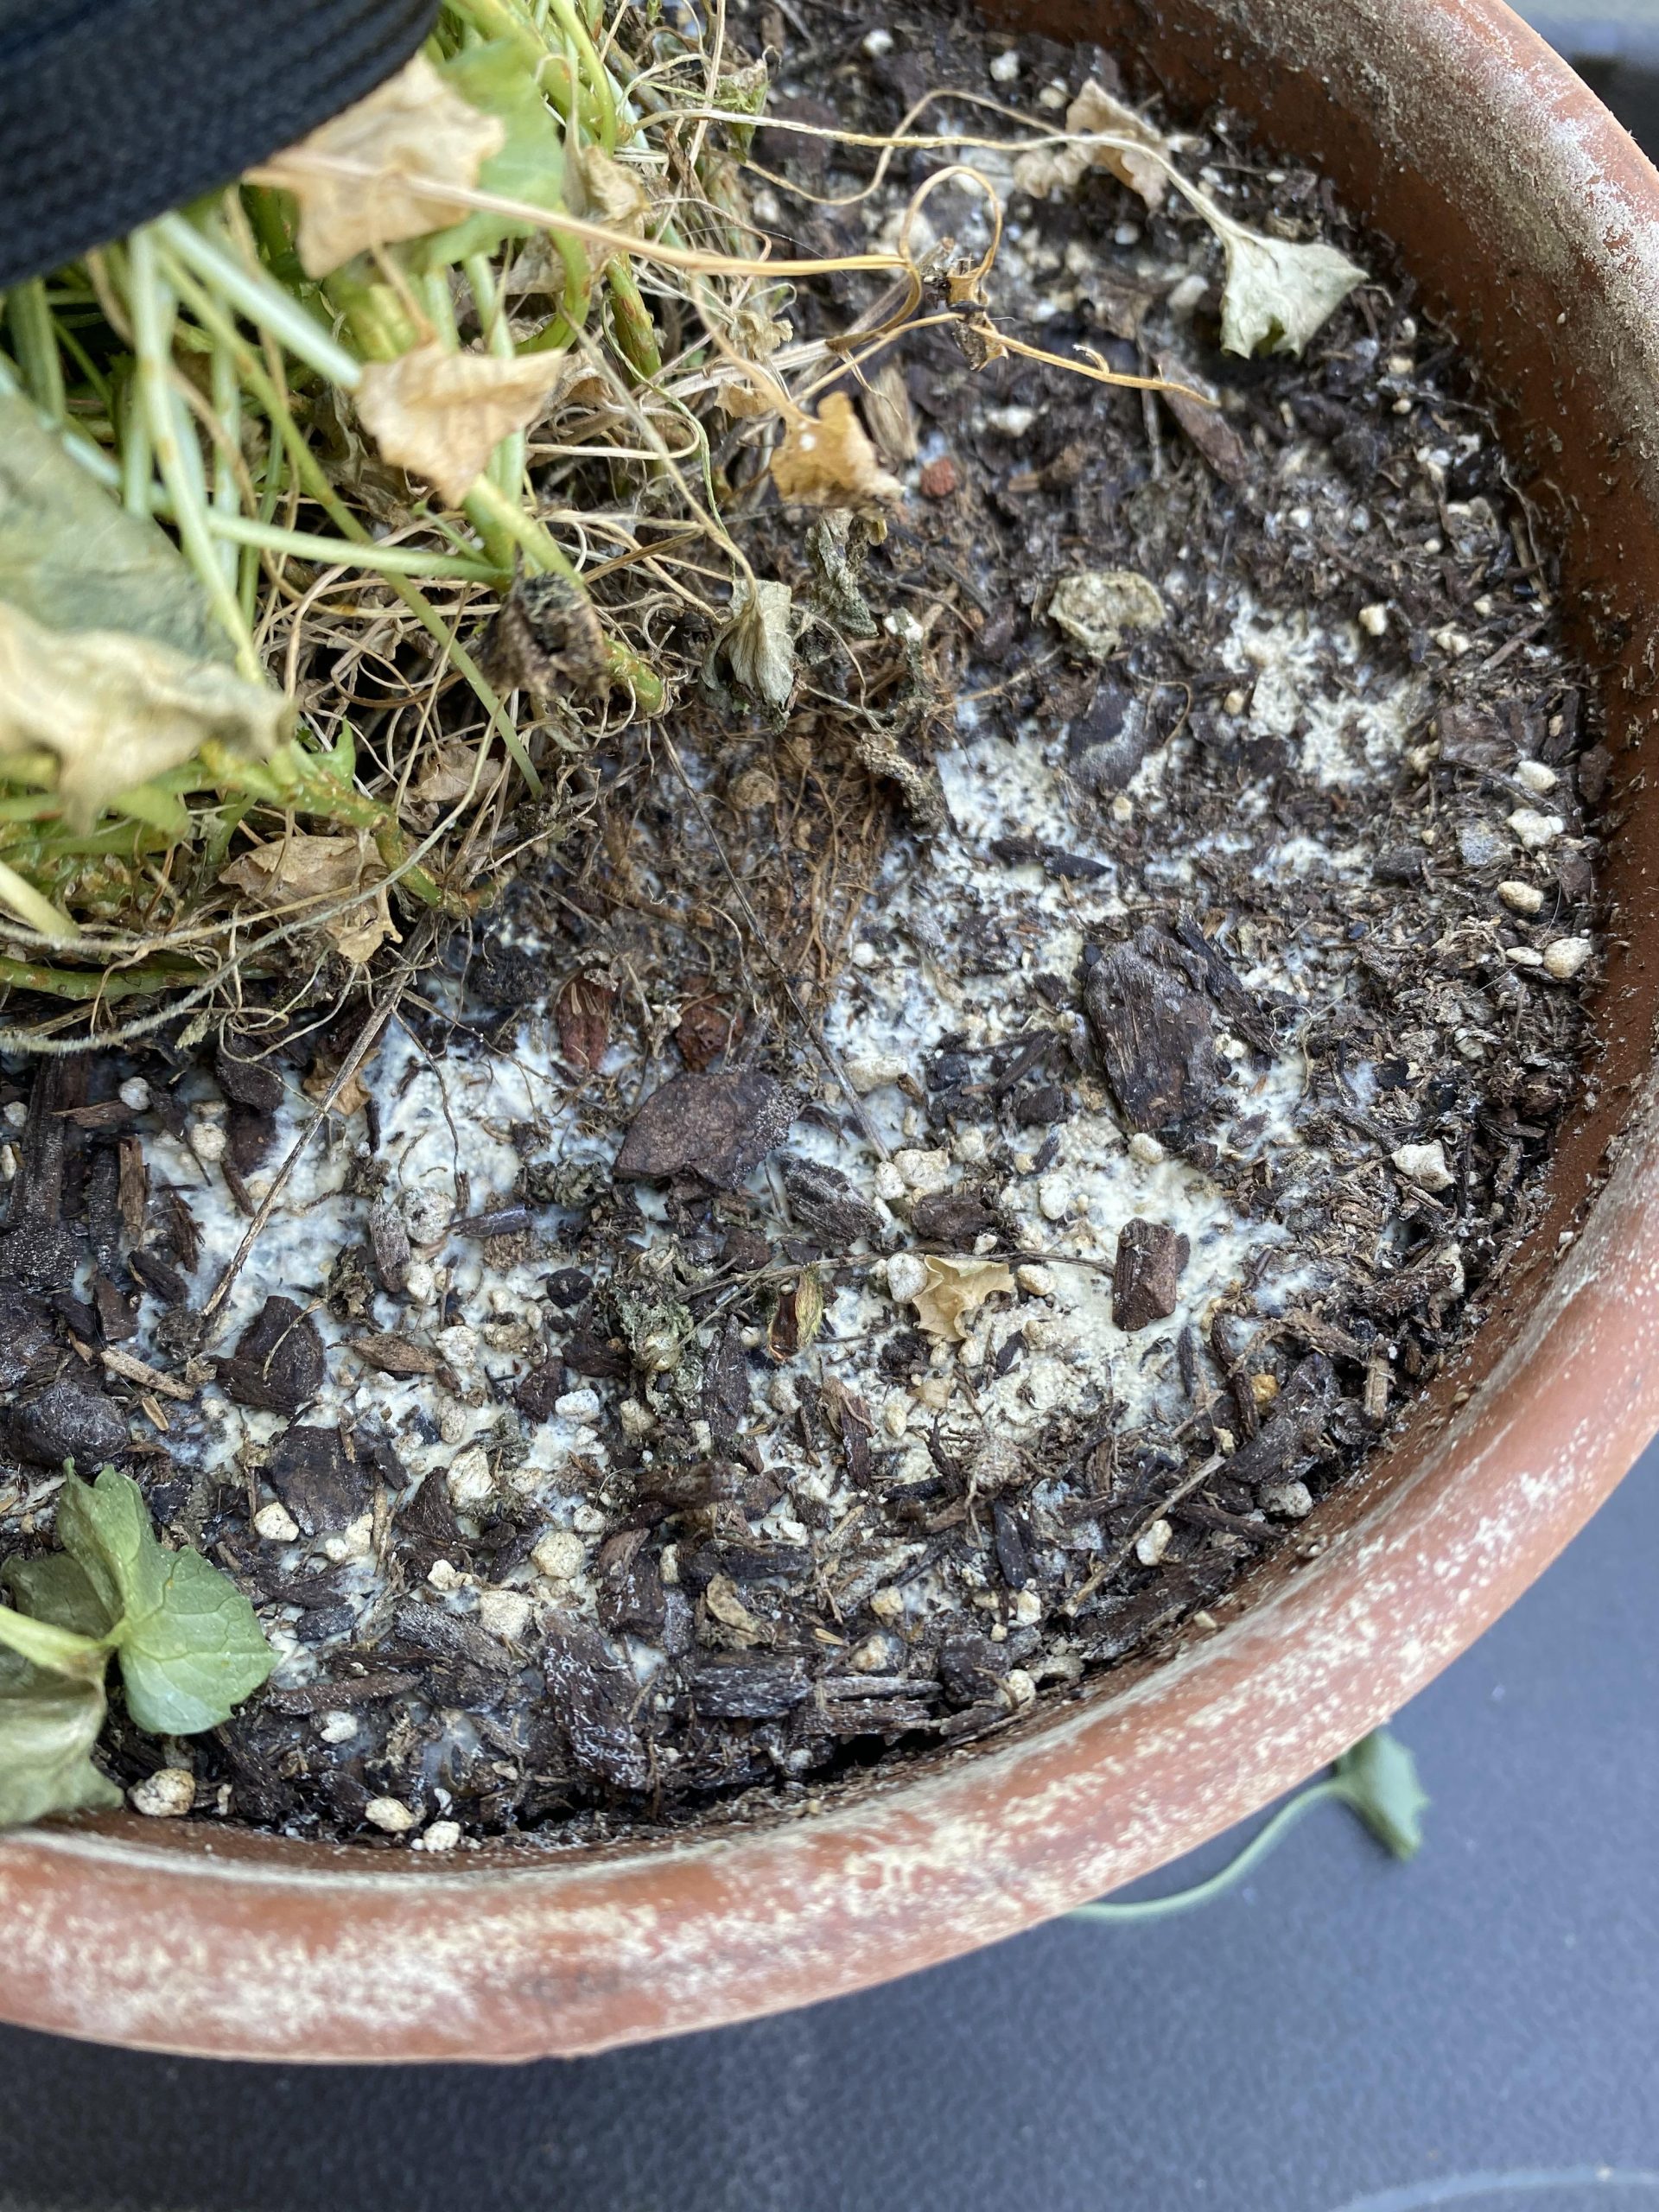 White mold on top soil, how do I get rid of it? : plantclinic